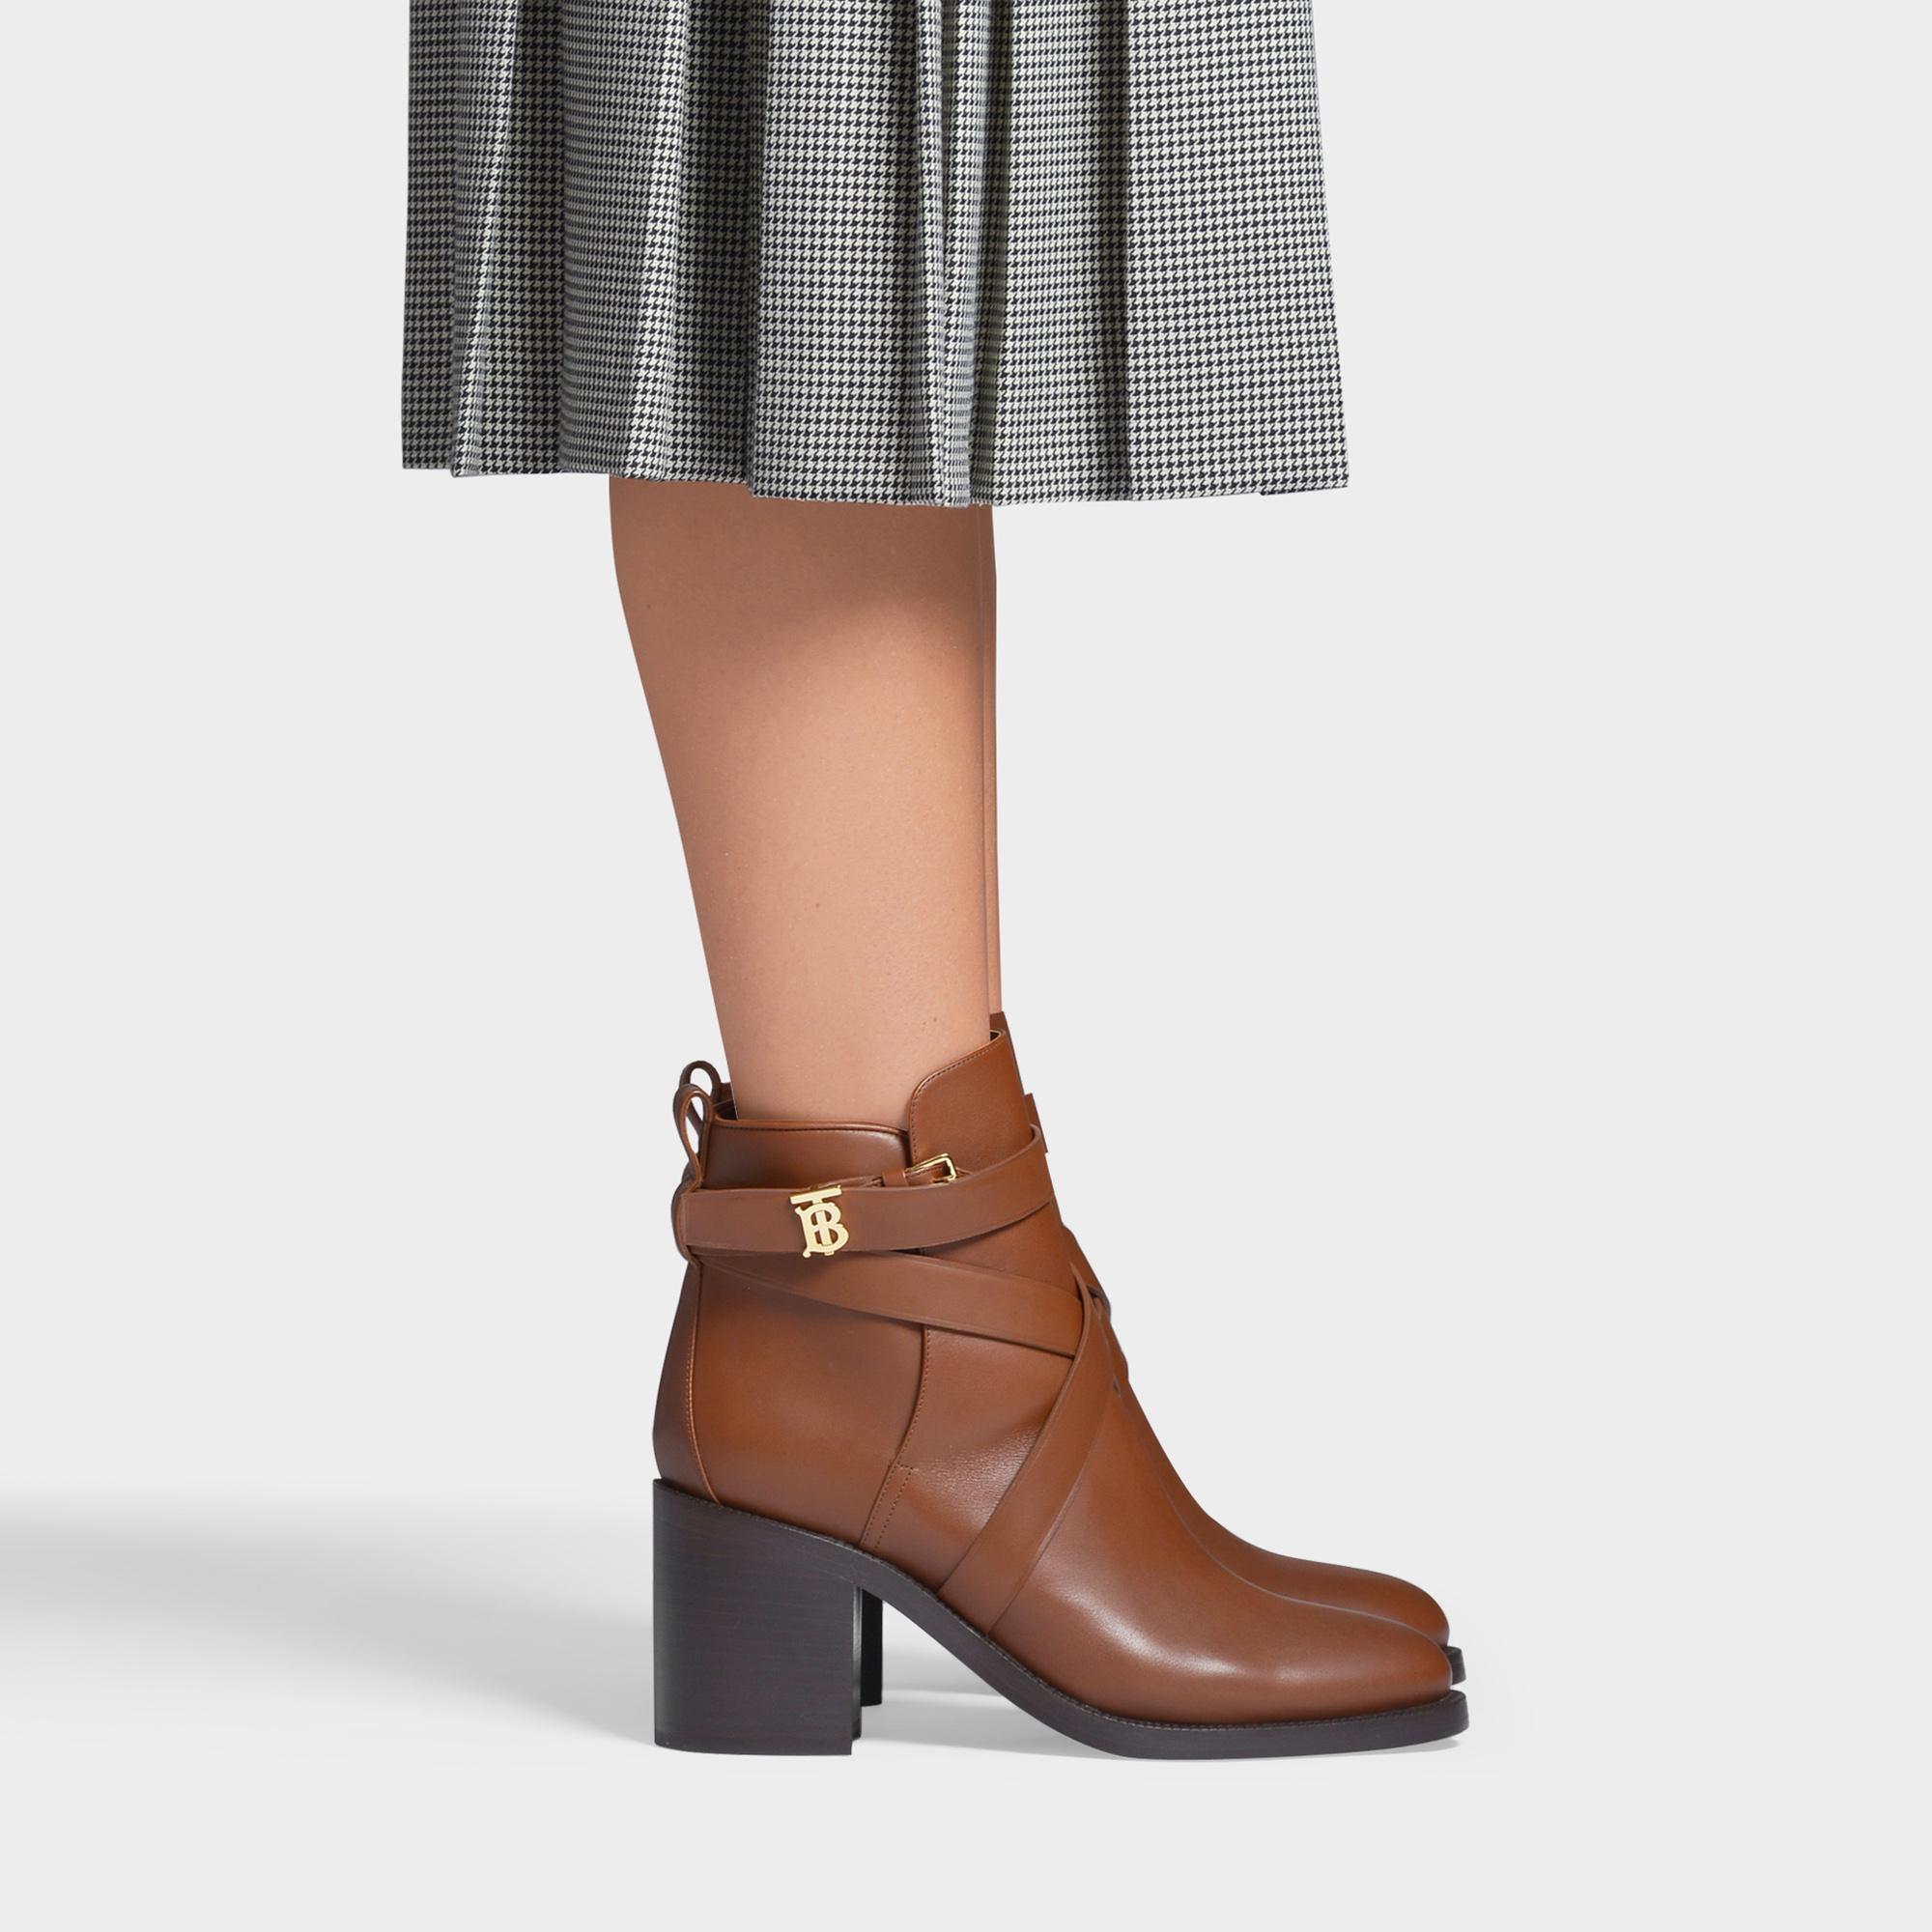 Burberry Brown Boots Poland, SAVE 38% 